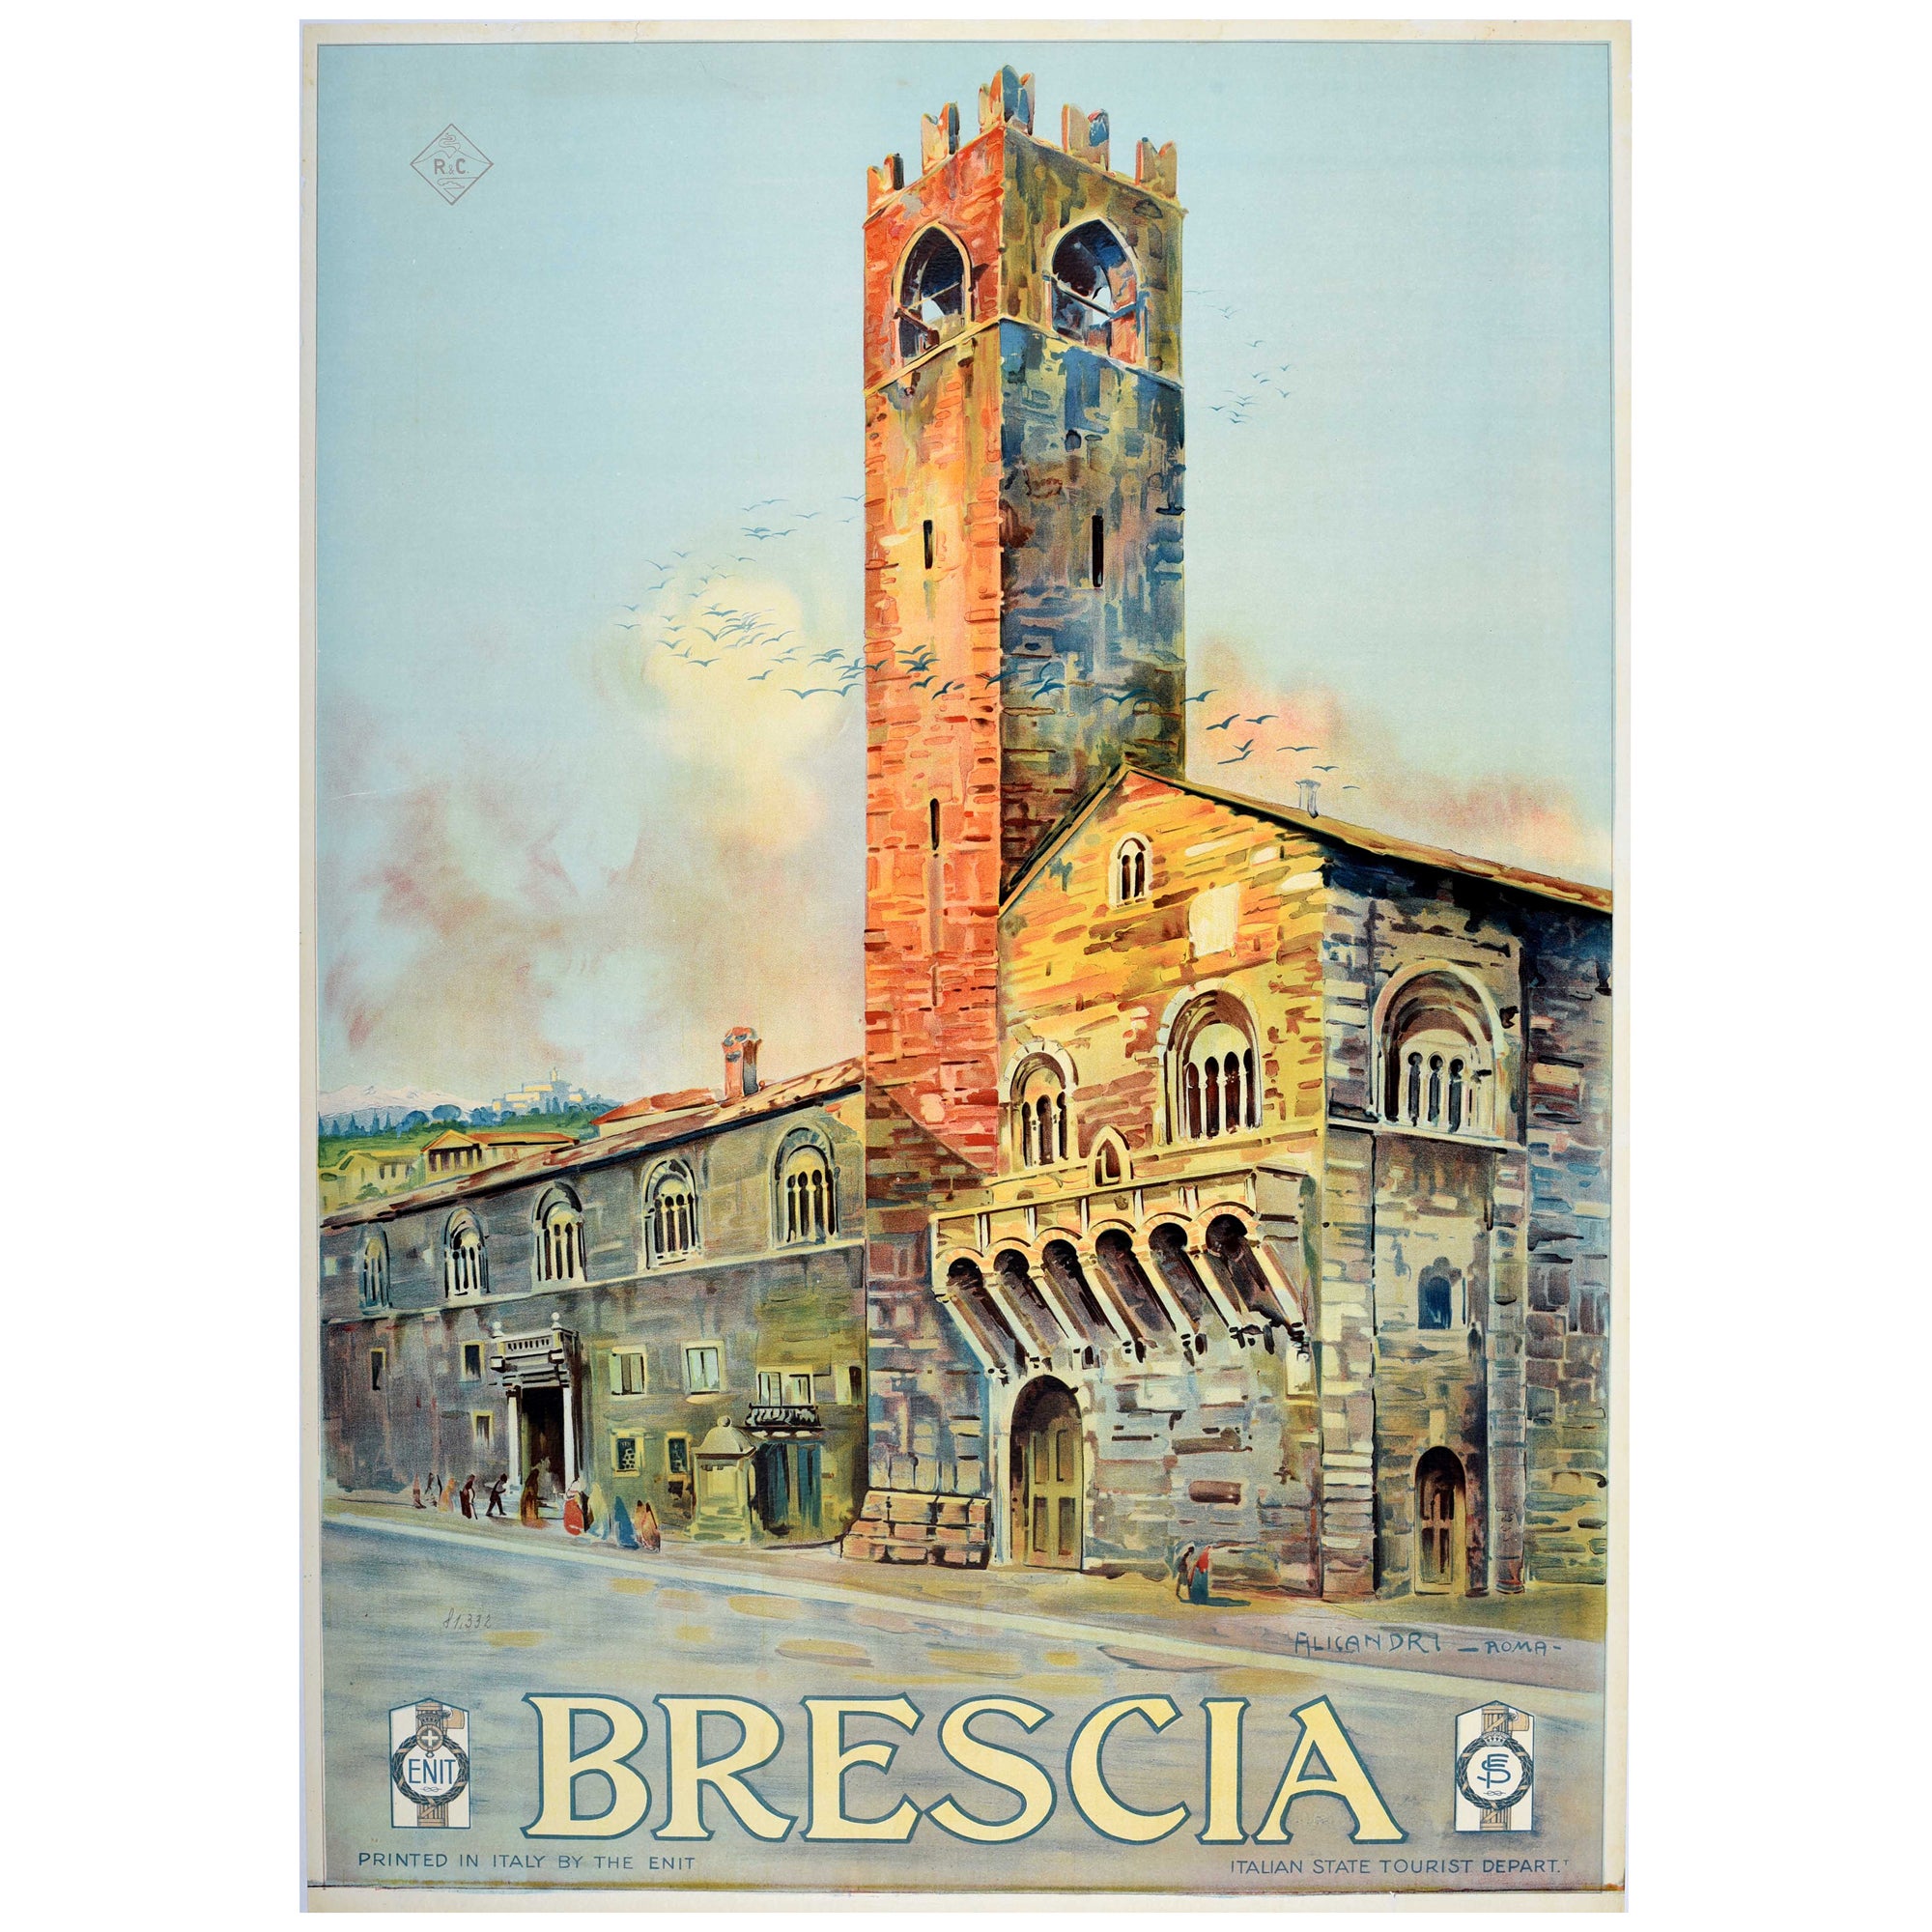 Original Vintage Travel Poster Brescia ENIT Palazzo Broletto Lombardy Italy For Sale